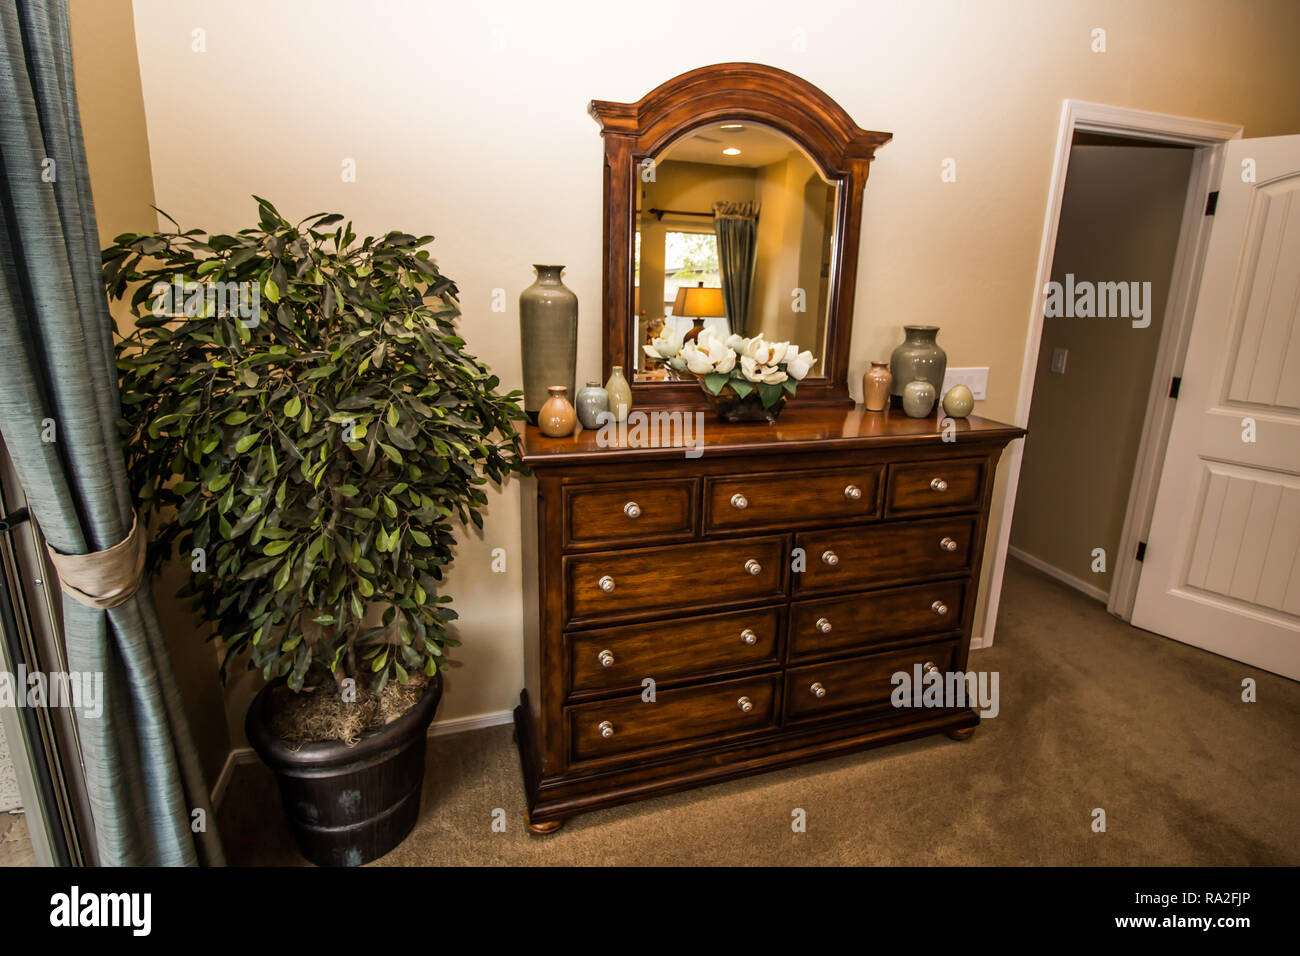 Bedroom Chest Of Drawers And Corner Plant Stock Photo 229937534